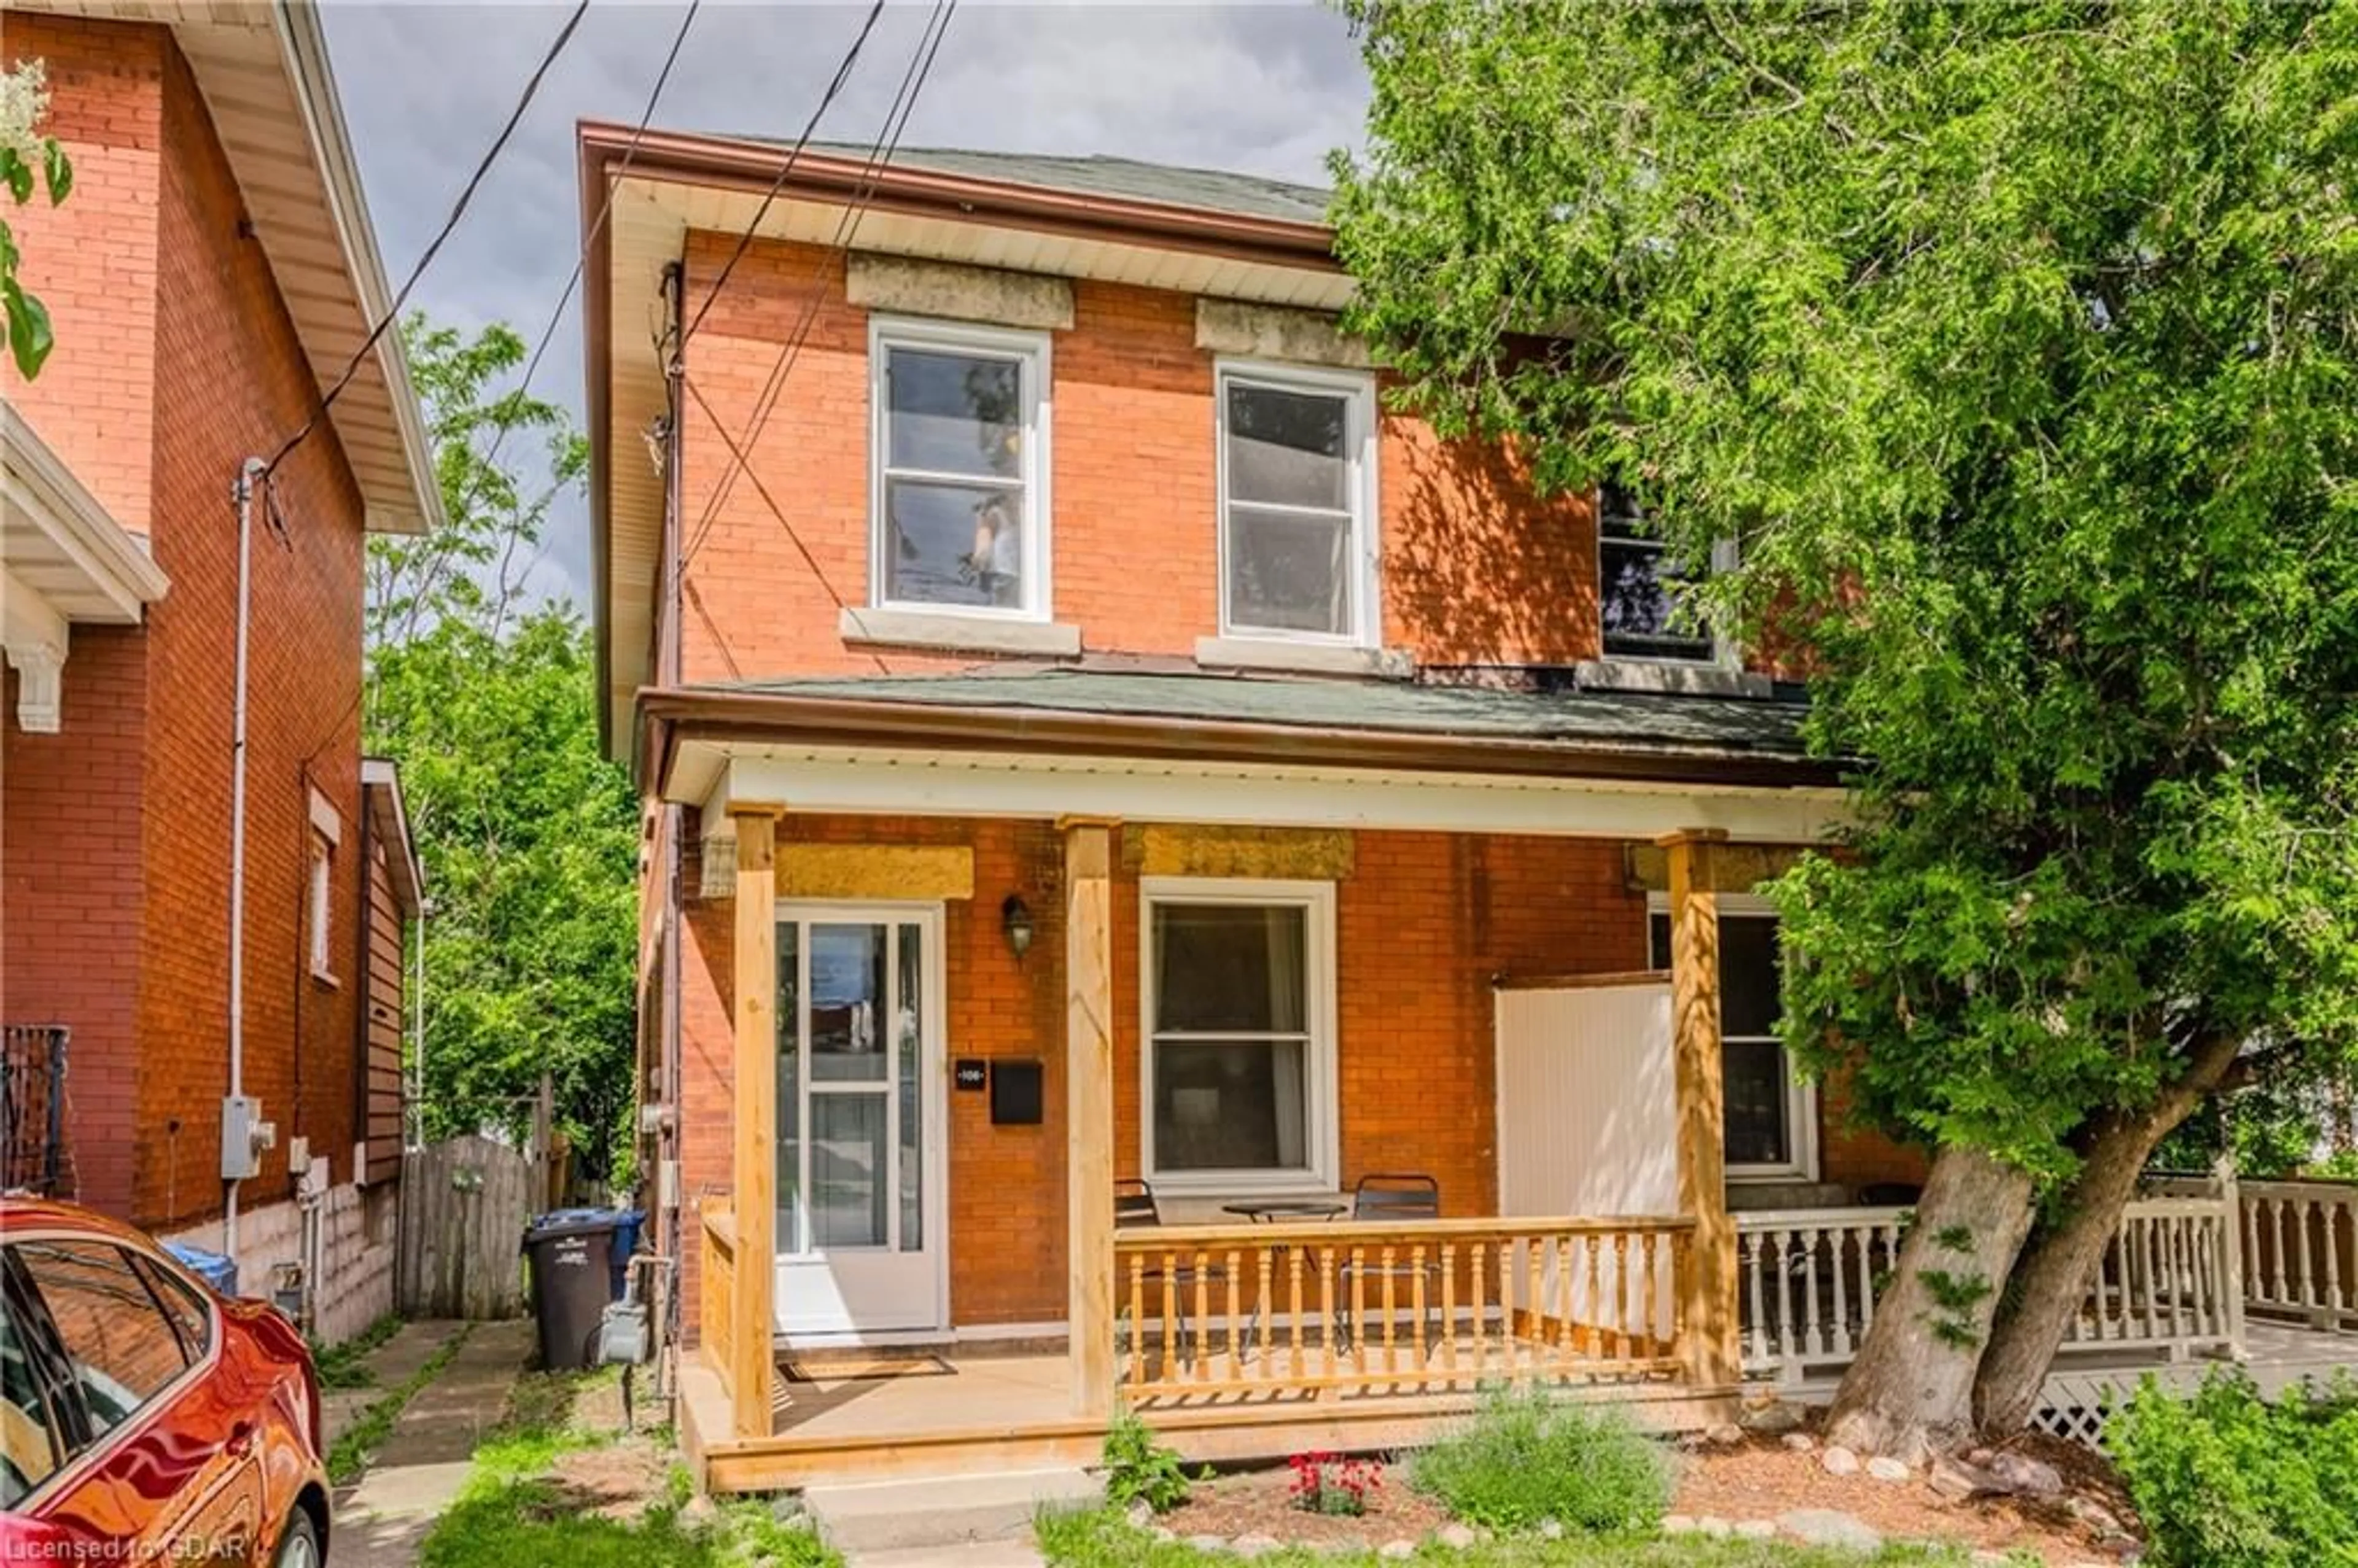 Home with brick exterior material for 108 Harris St, Guelph Ontario N1E 5T1